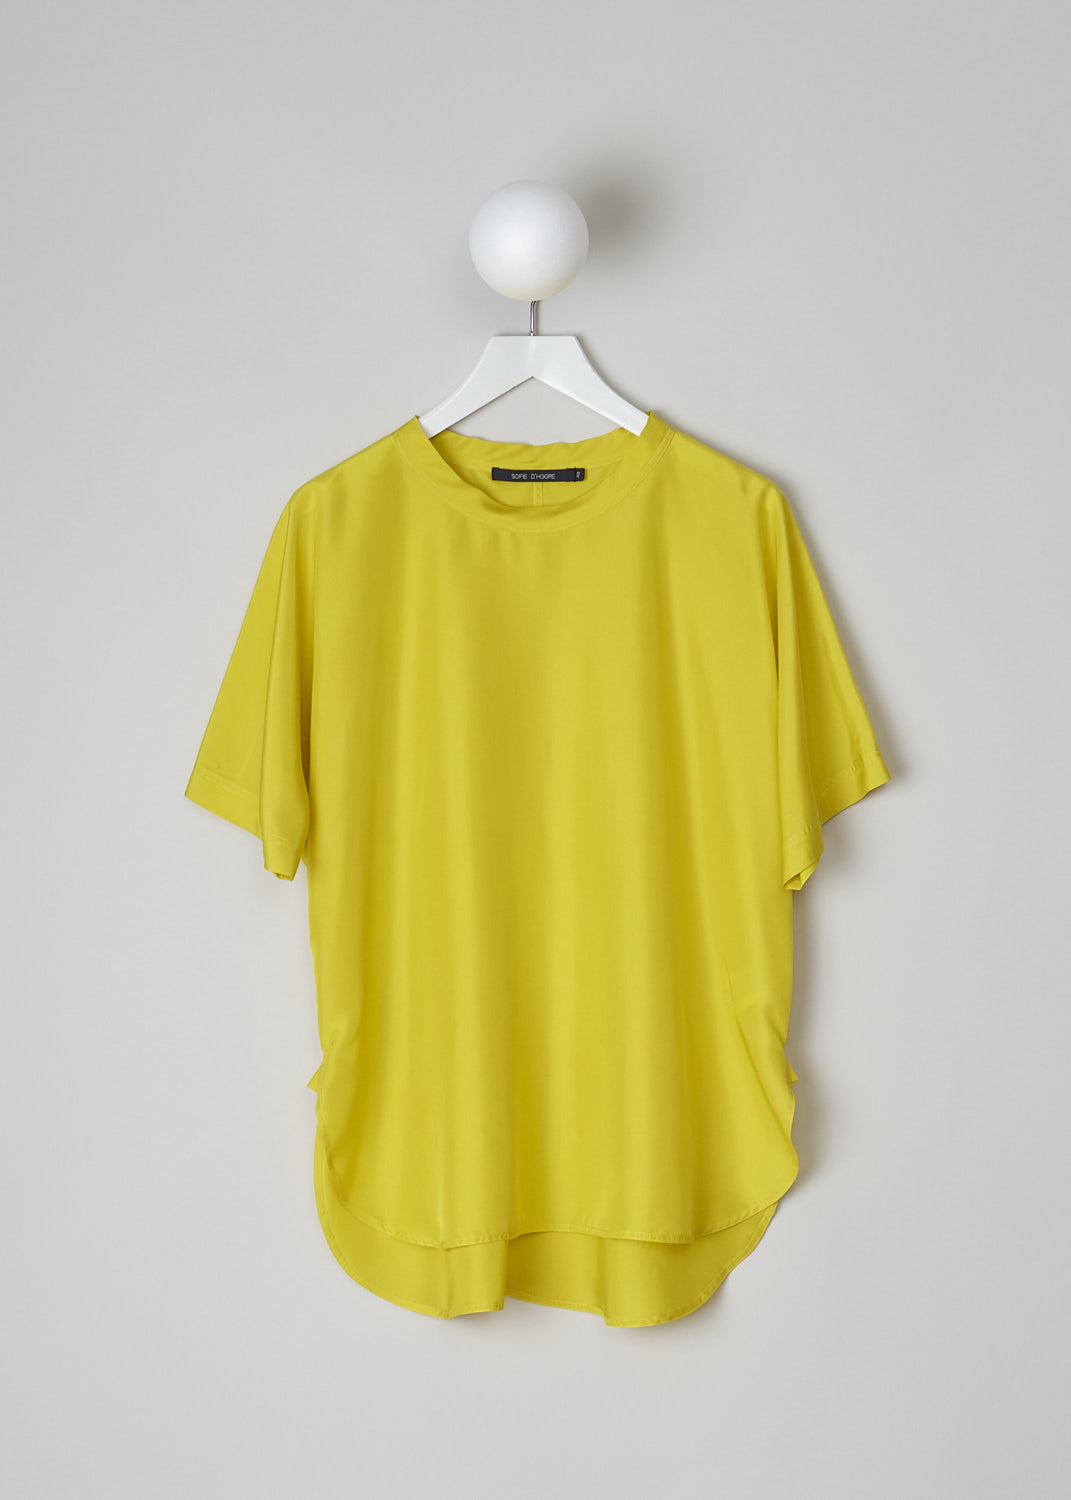 SOFIE D’HOORE, BRIGHT YELLOW SILK TOP, BAGEL_SOHO_BUTTERCUP, Yellow, Front, The bright yellow silk top has a round neckline and short sleeves. The top has a rounded hemline with an asymmetrical finish, meaning the back is a little longer than the front. 
